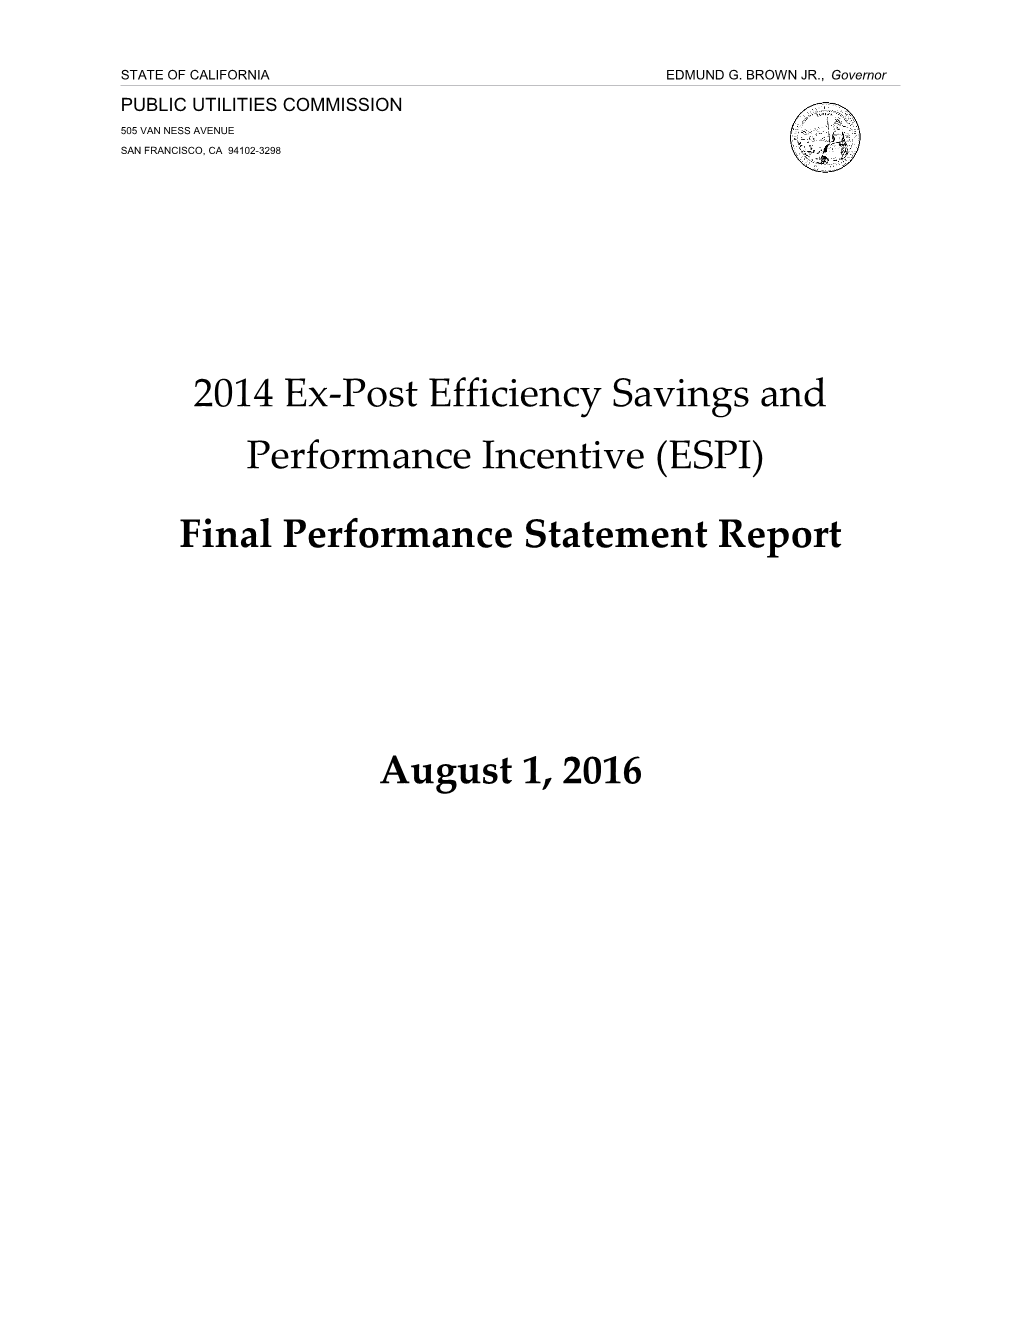 2014 Ex-Post Efficiency Savings and Performance Incentive (ESPI)